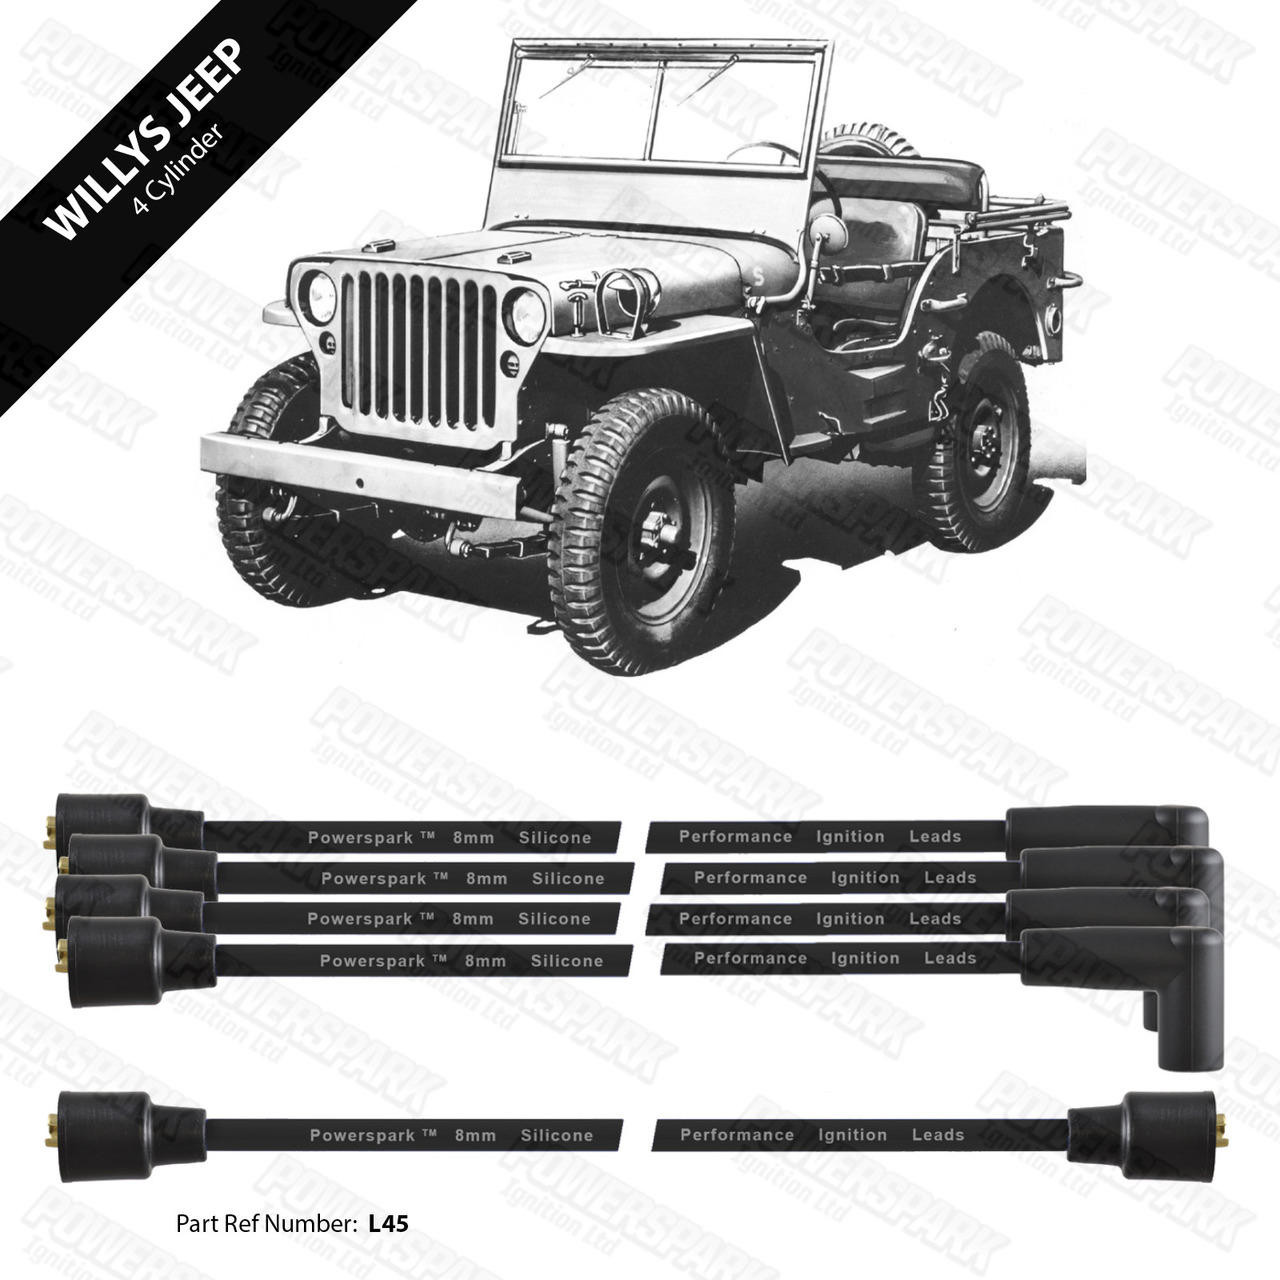 Powerspark Willys Jeep HT Leads 8mm Double Silicone